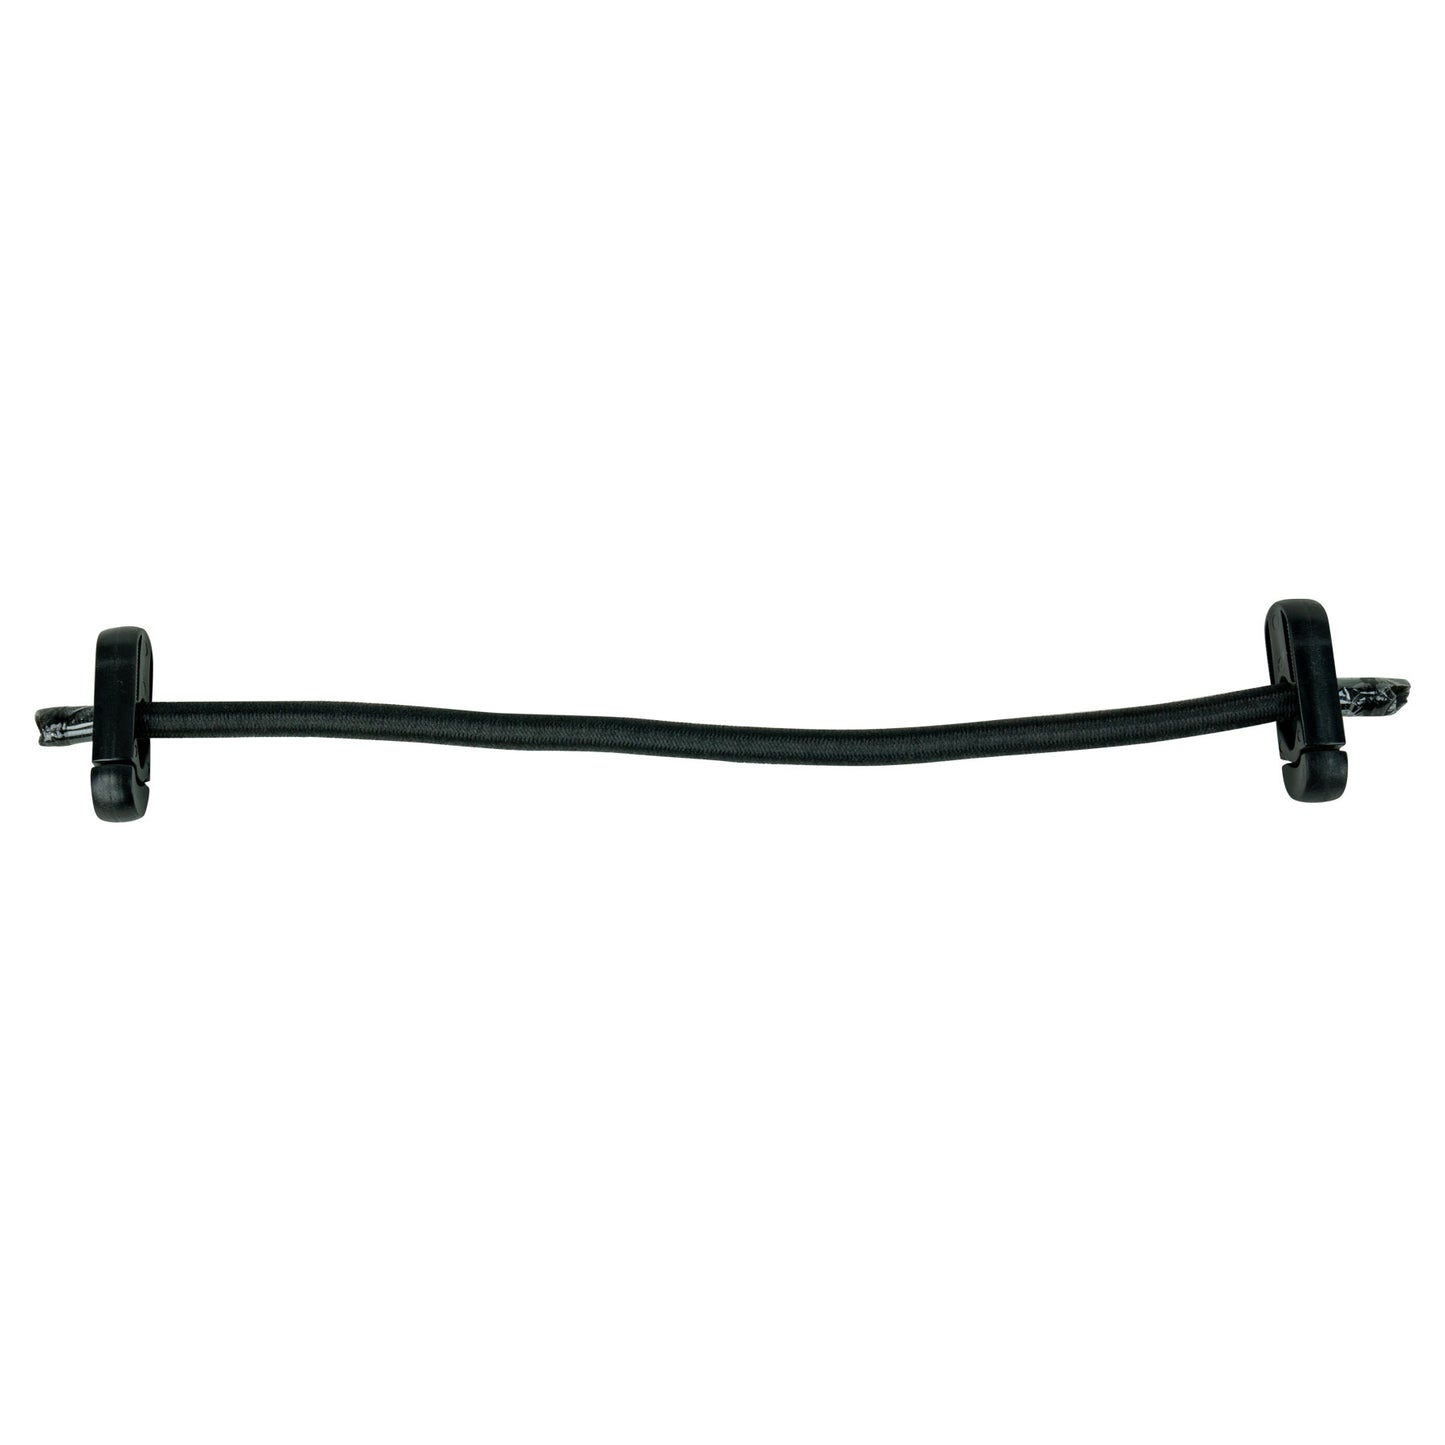 Pro Series Full Body Canada Black Bungees - 6 Bungees